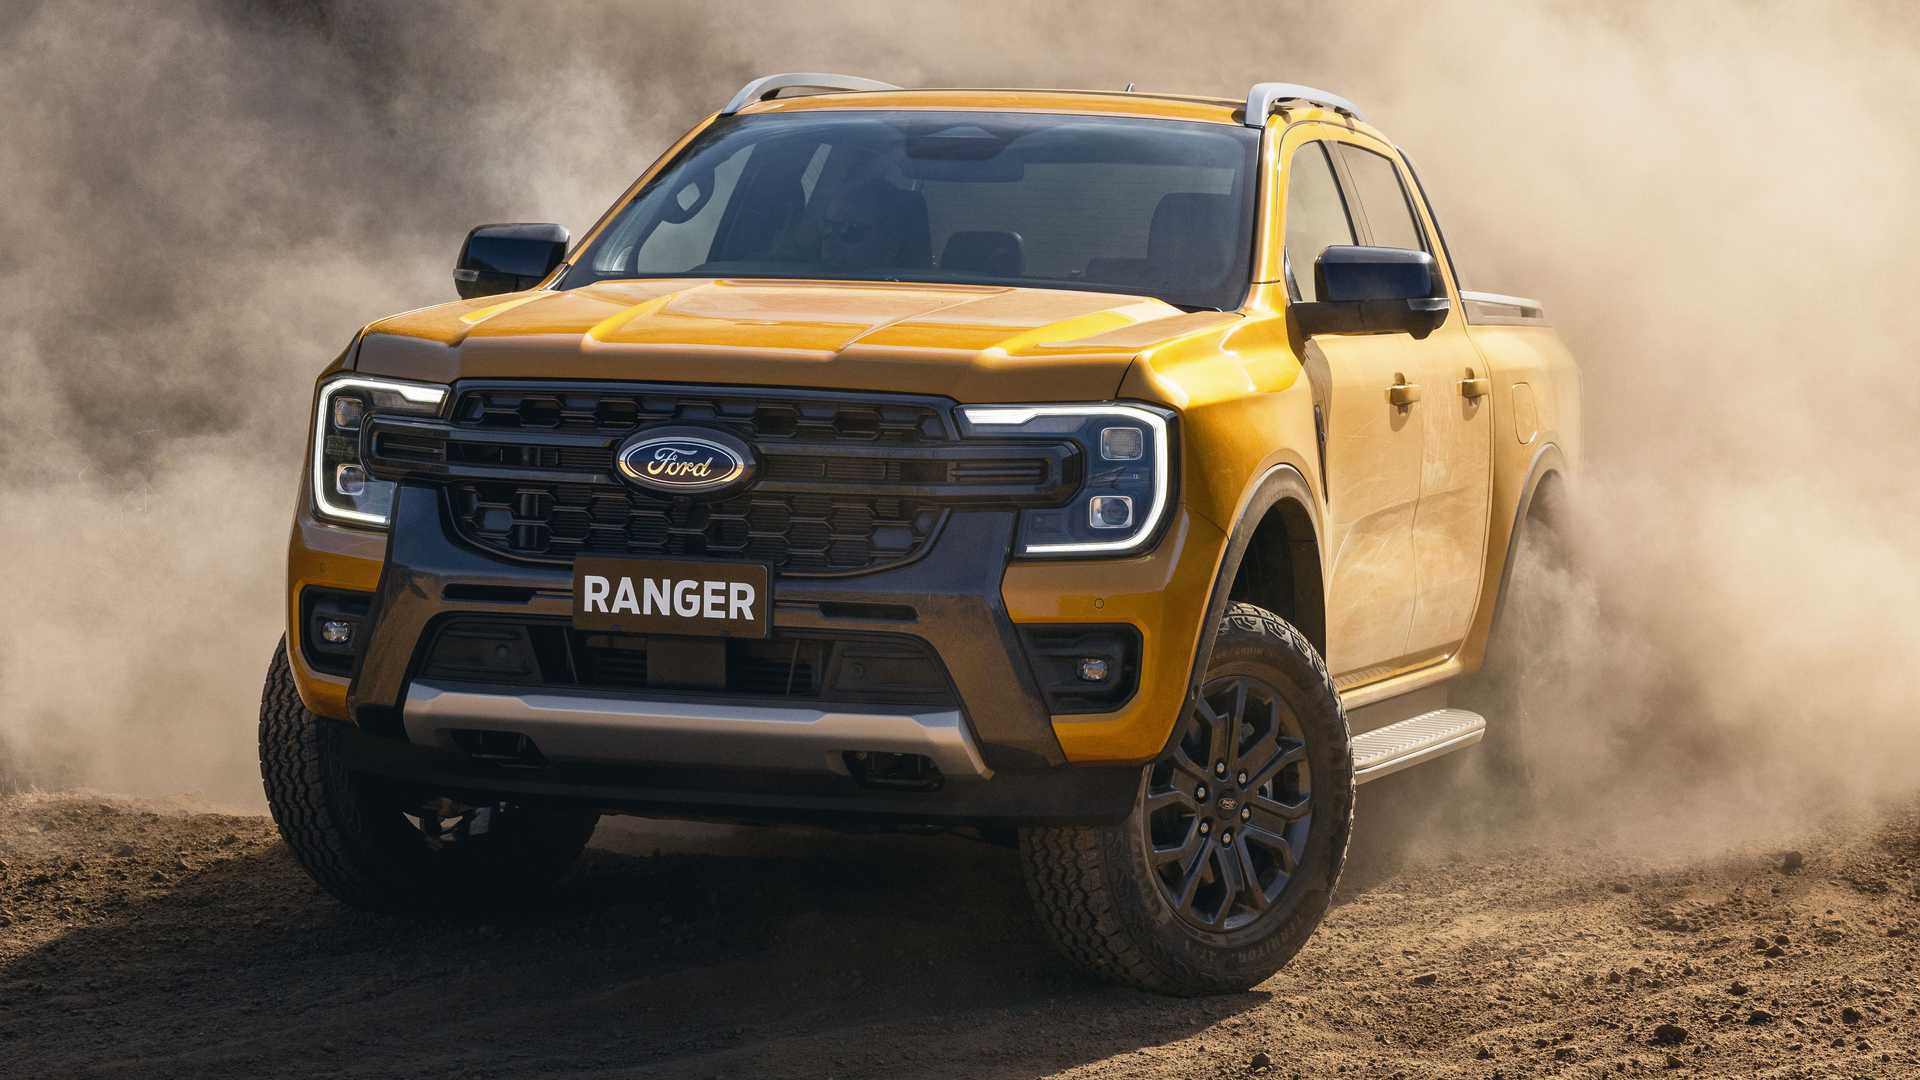 Ford Ranger Launched